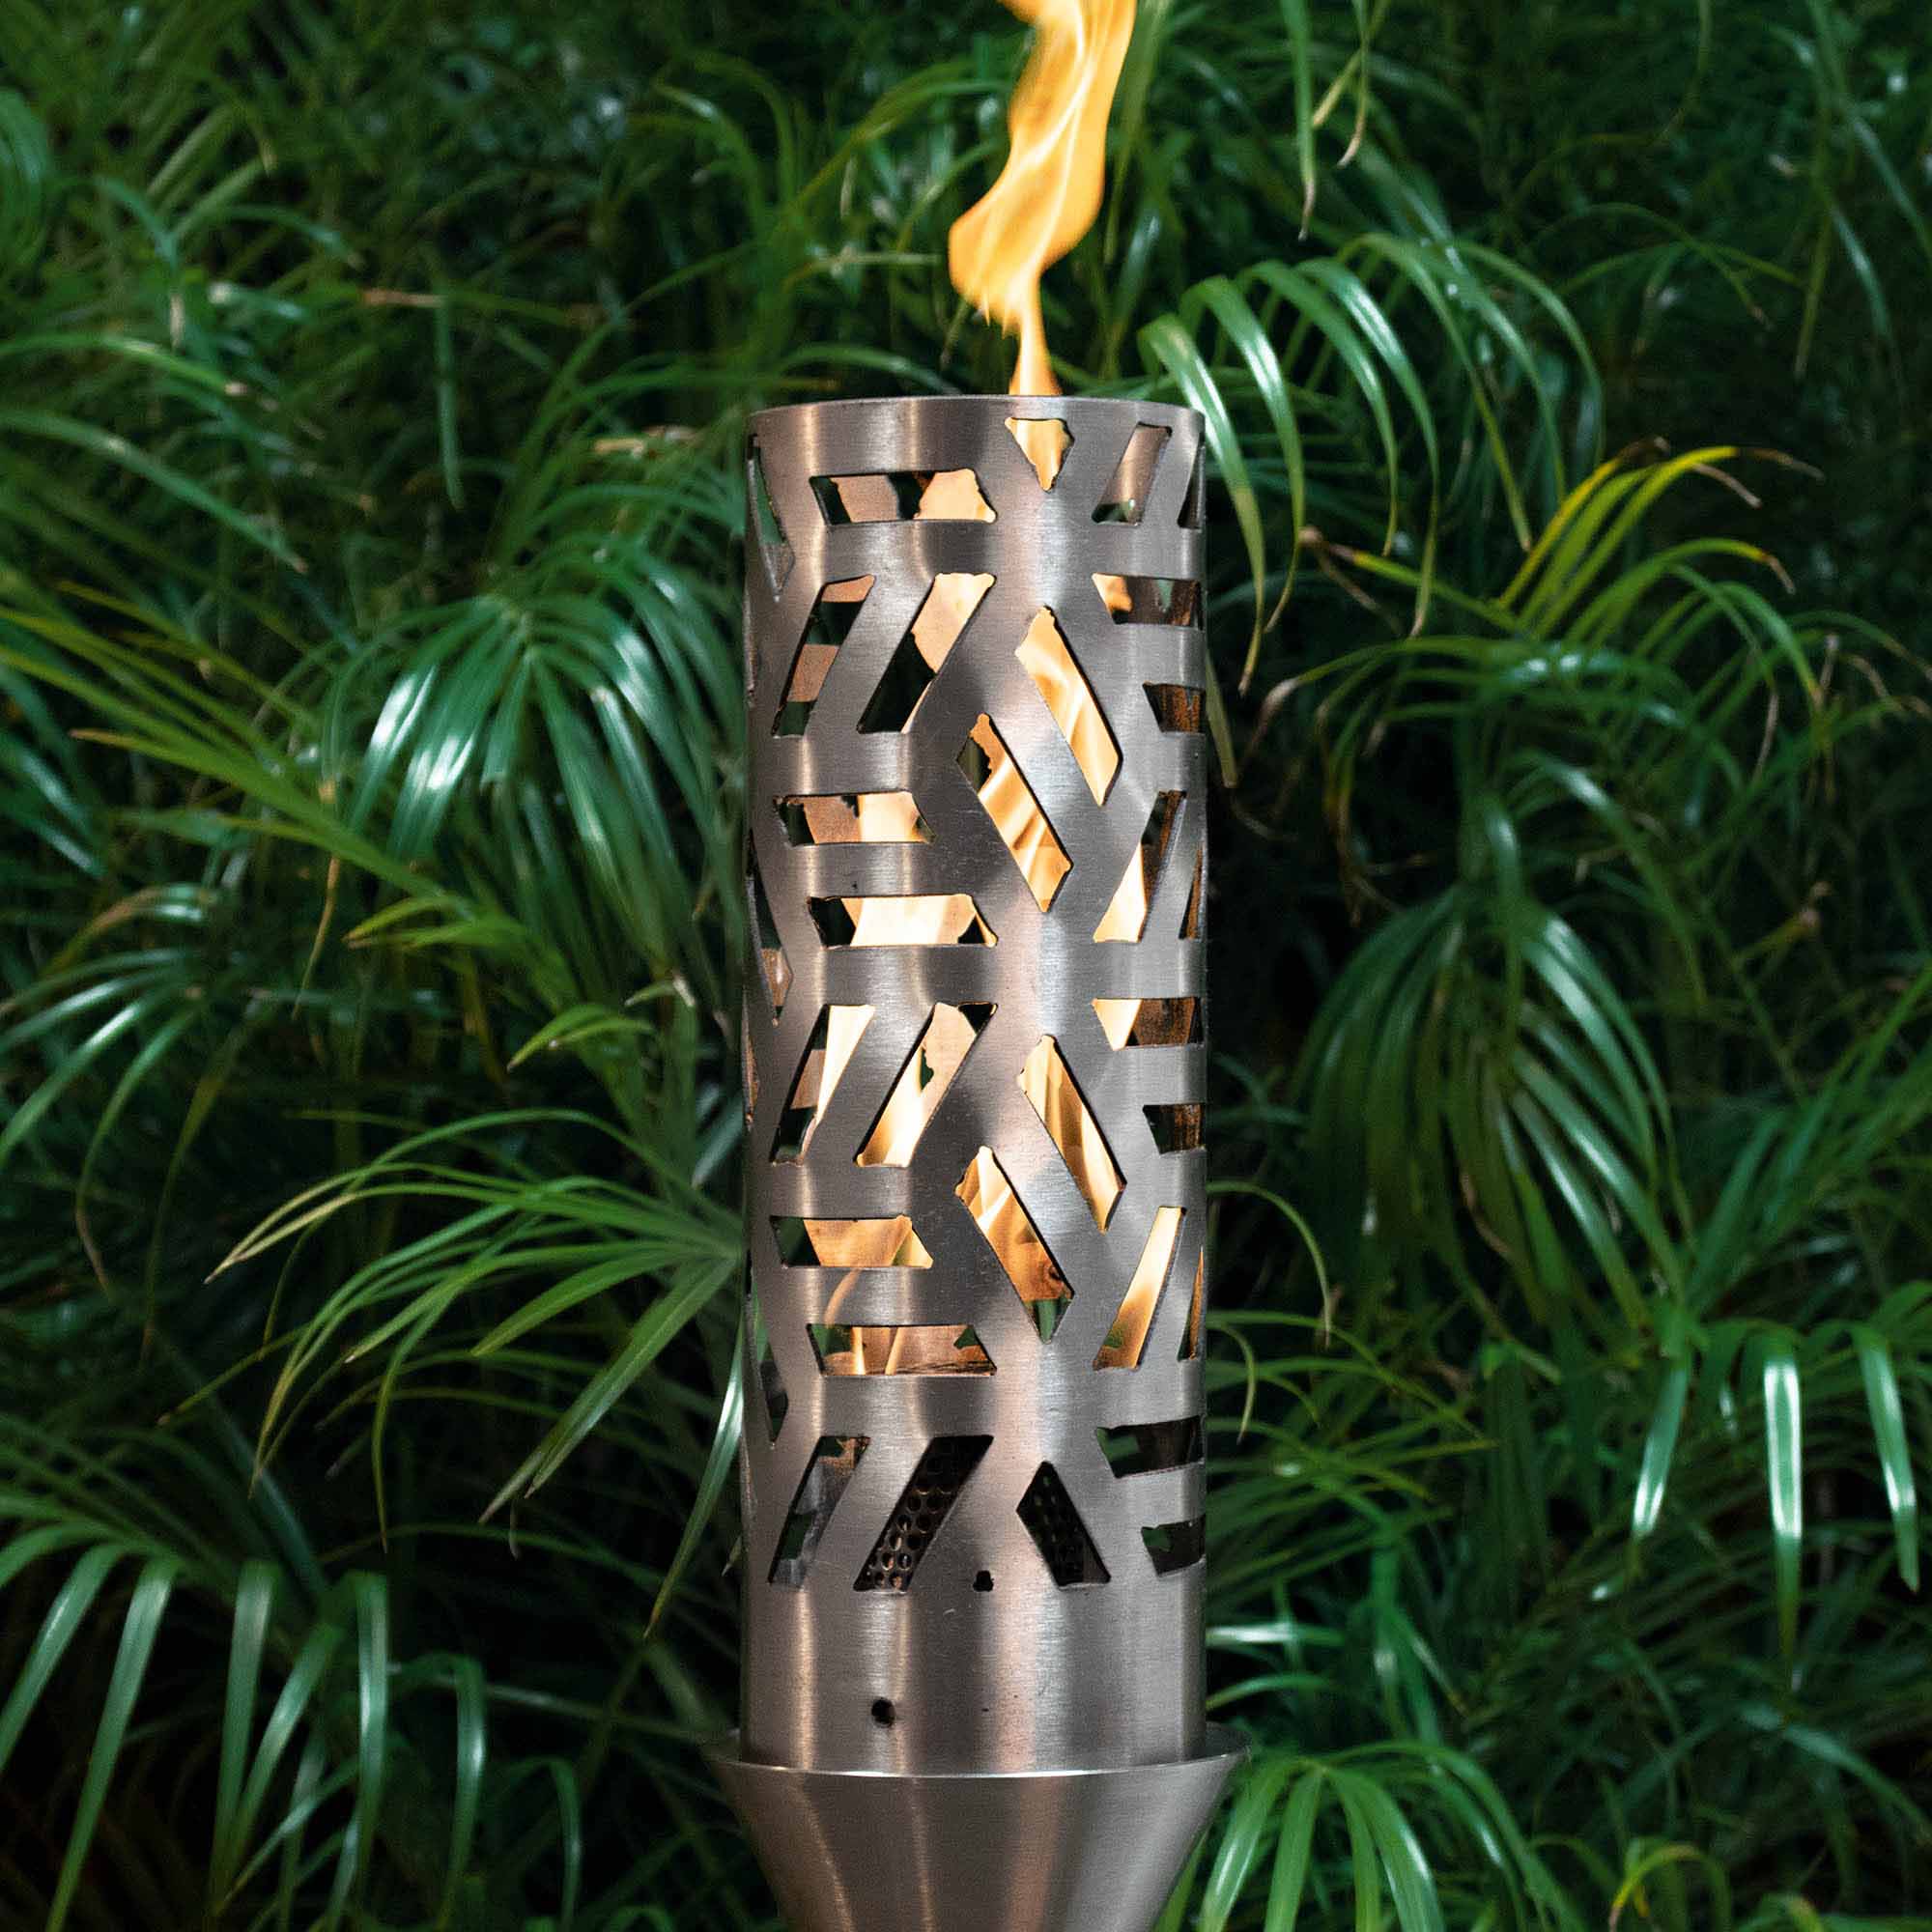 The Outdoor Plus Cubist Fire Torch